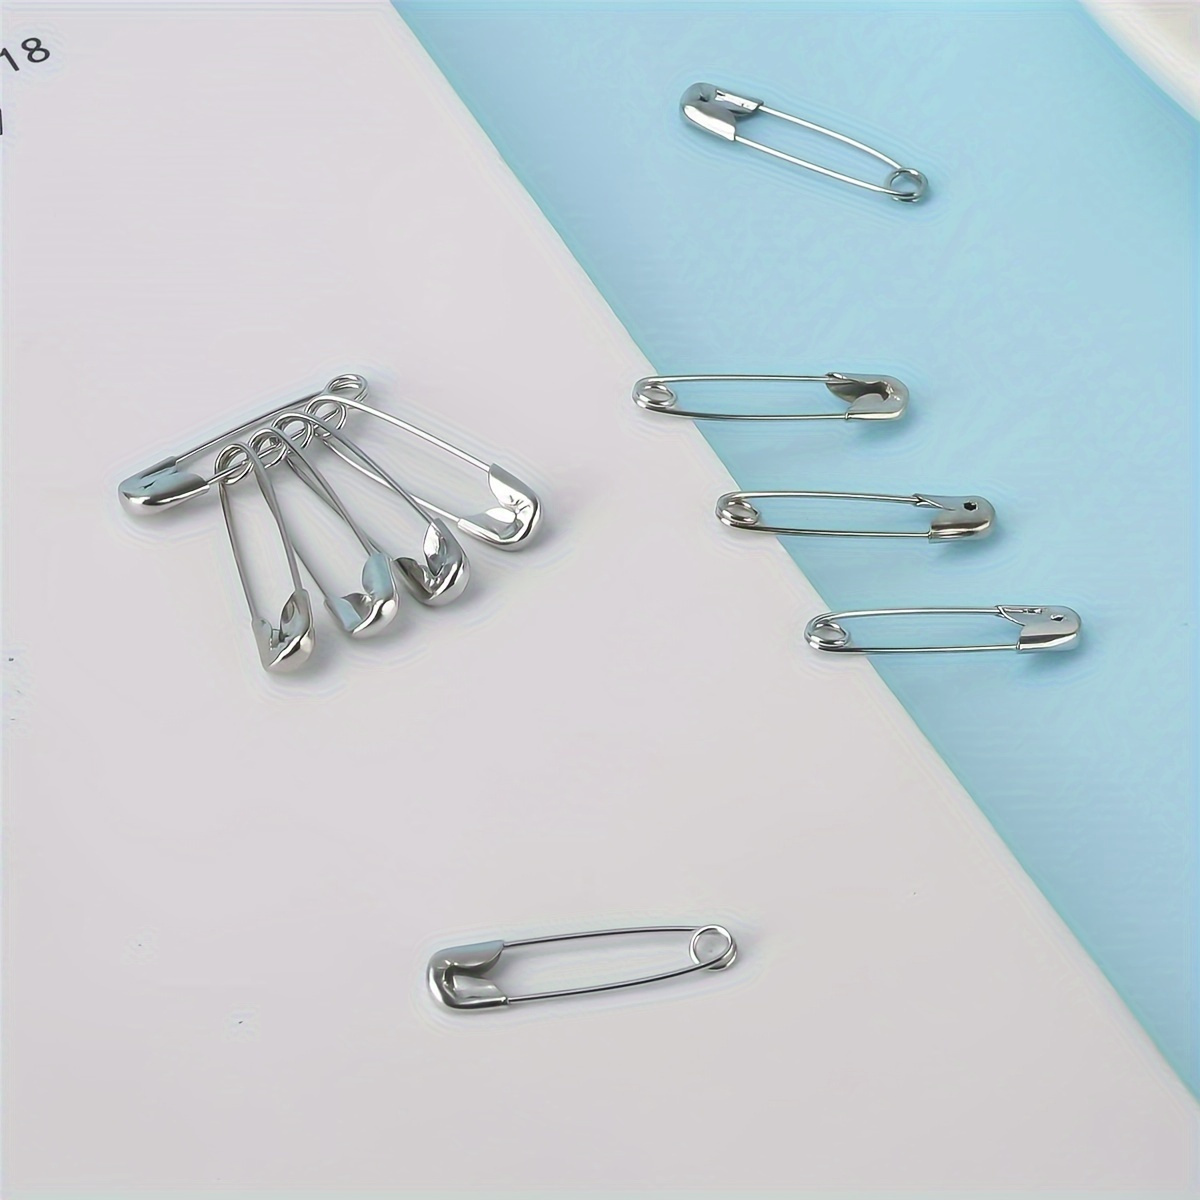 

260 Pieces Safety Pins, 4 Assorted Sizes Of Durable, Silver Small And Large Safety Pins Bulk, Rust-resistant Nickel Plated Steel, Sharp Edge For Clothes, Sewing, Arts & Craft